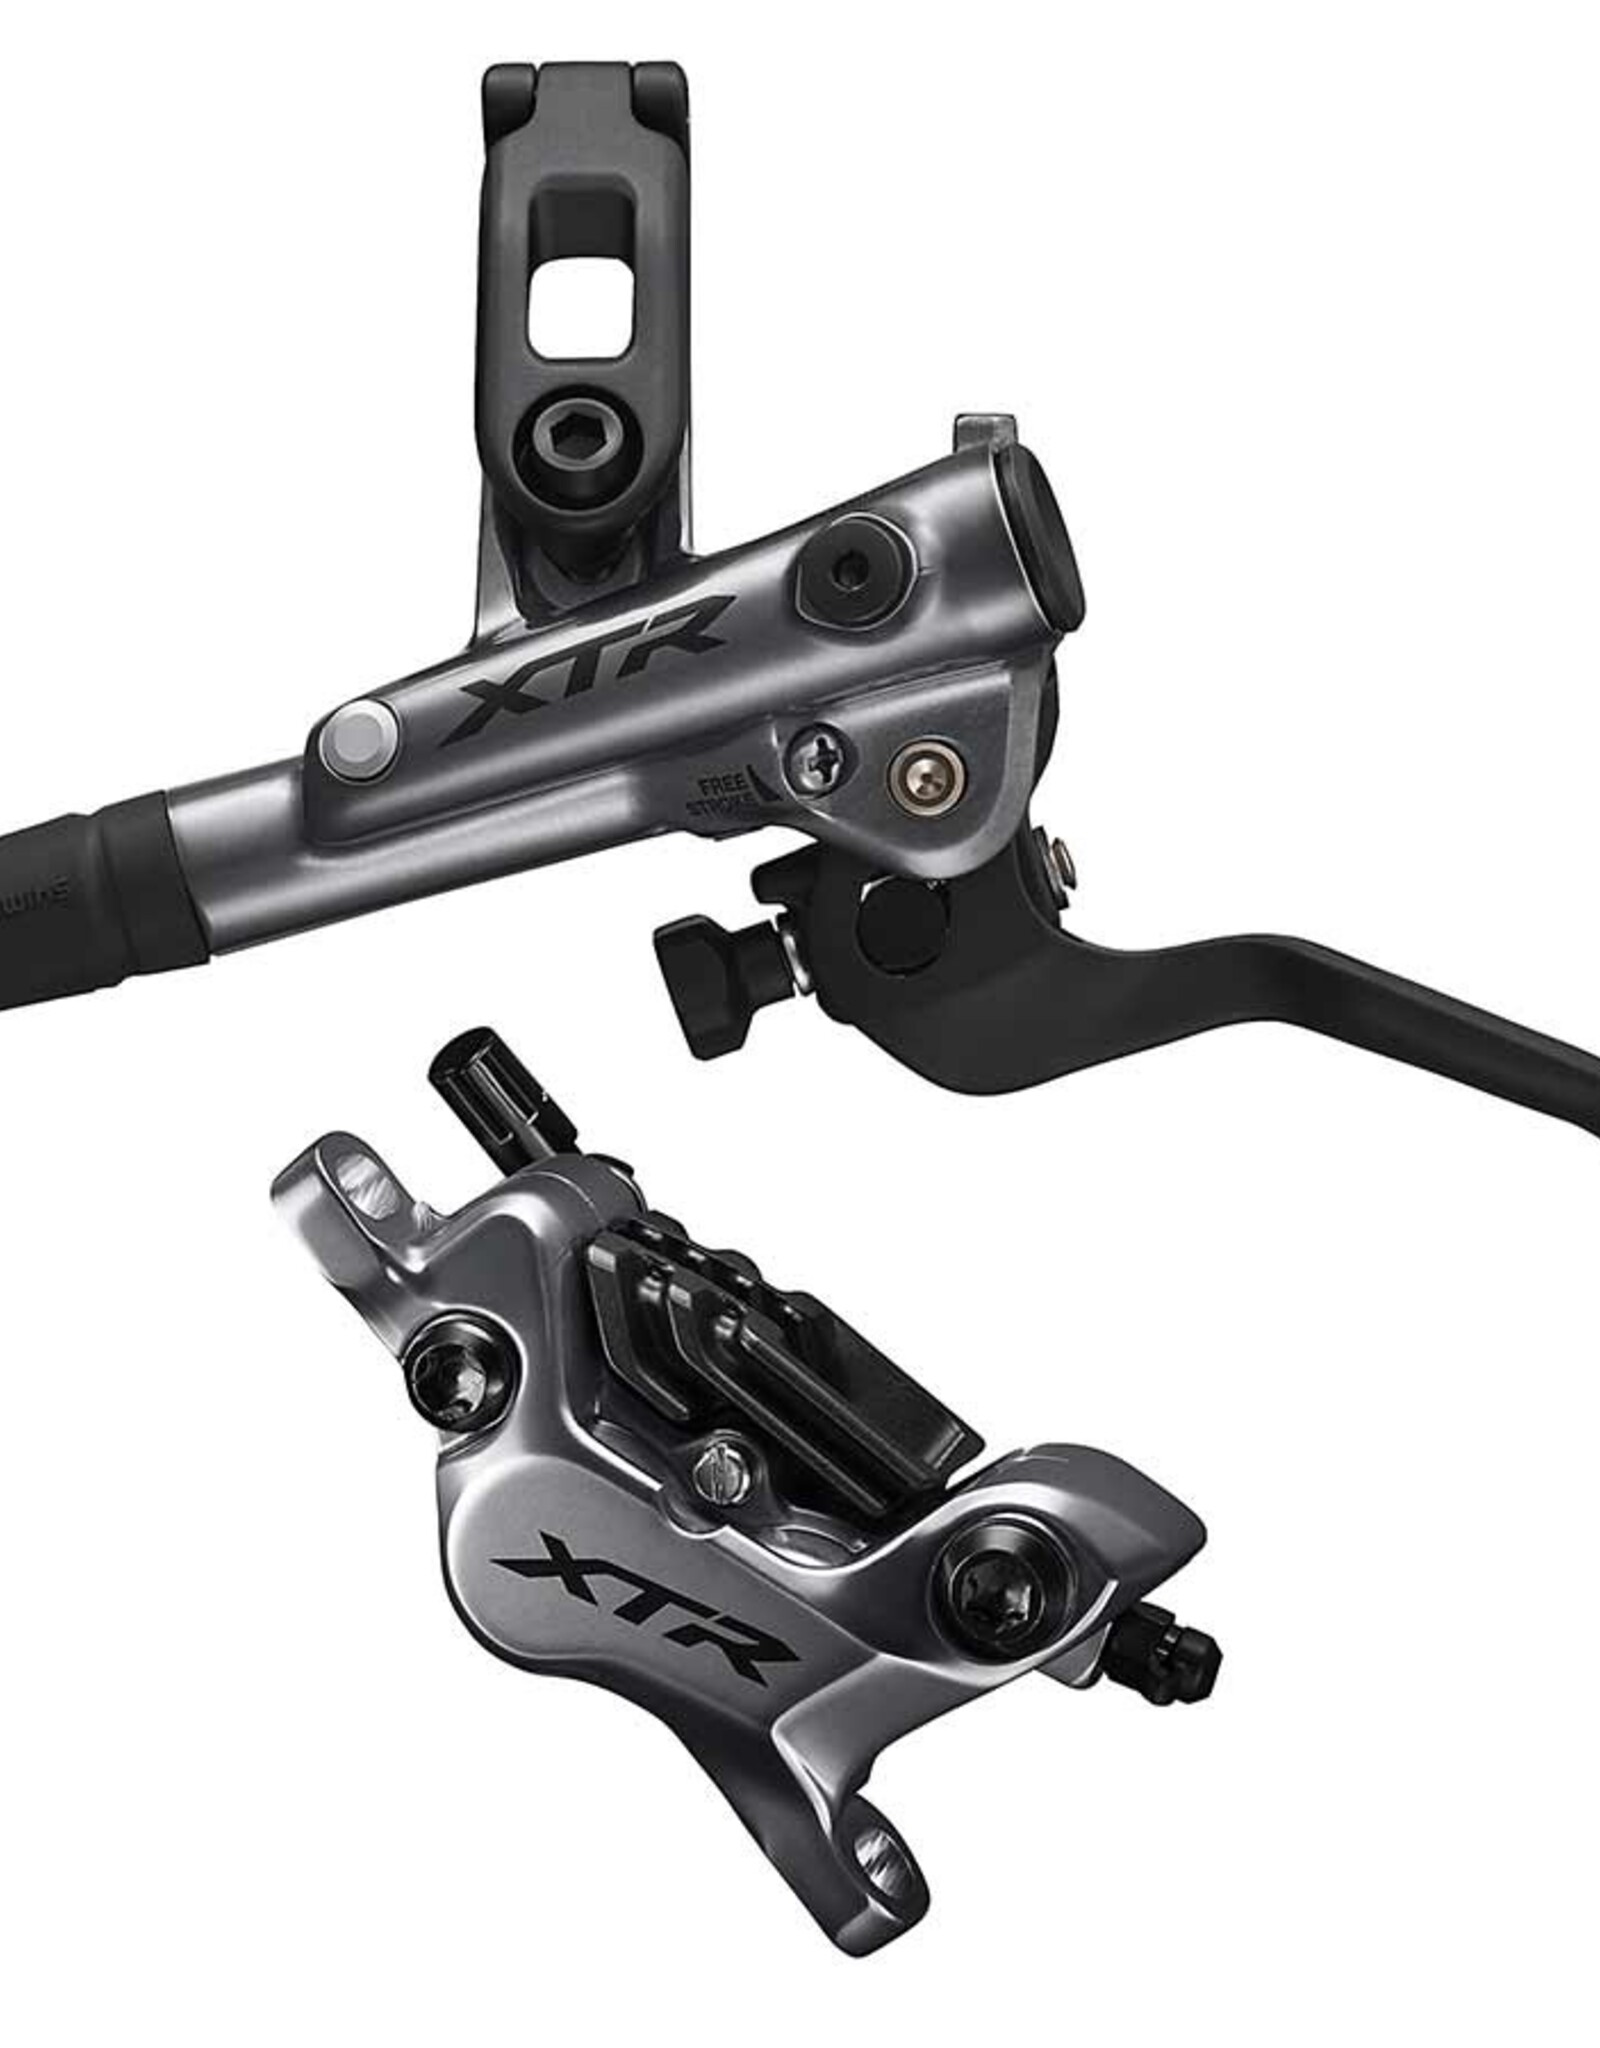 Shimano Shimano, XTR BL/BR-M9120, MTB Hydraulic Disc Brake, Front, Post mount, Disc: Not included, 385g, Black, Kit